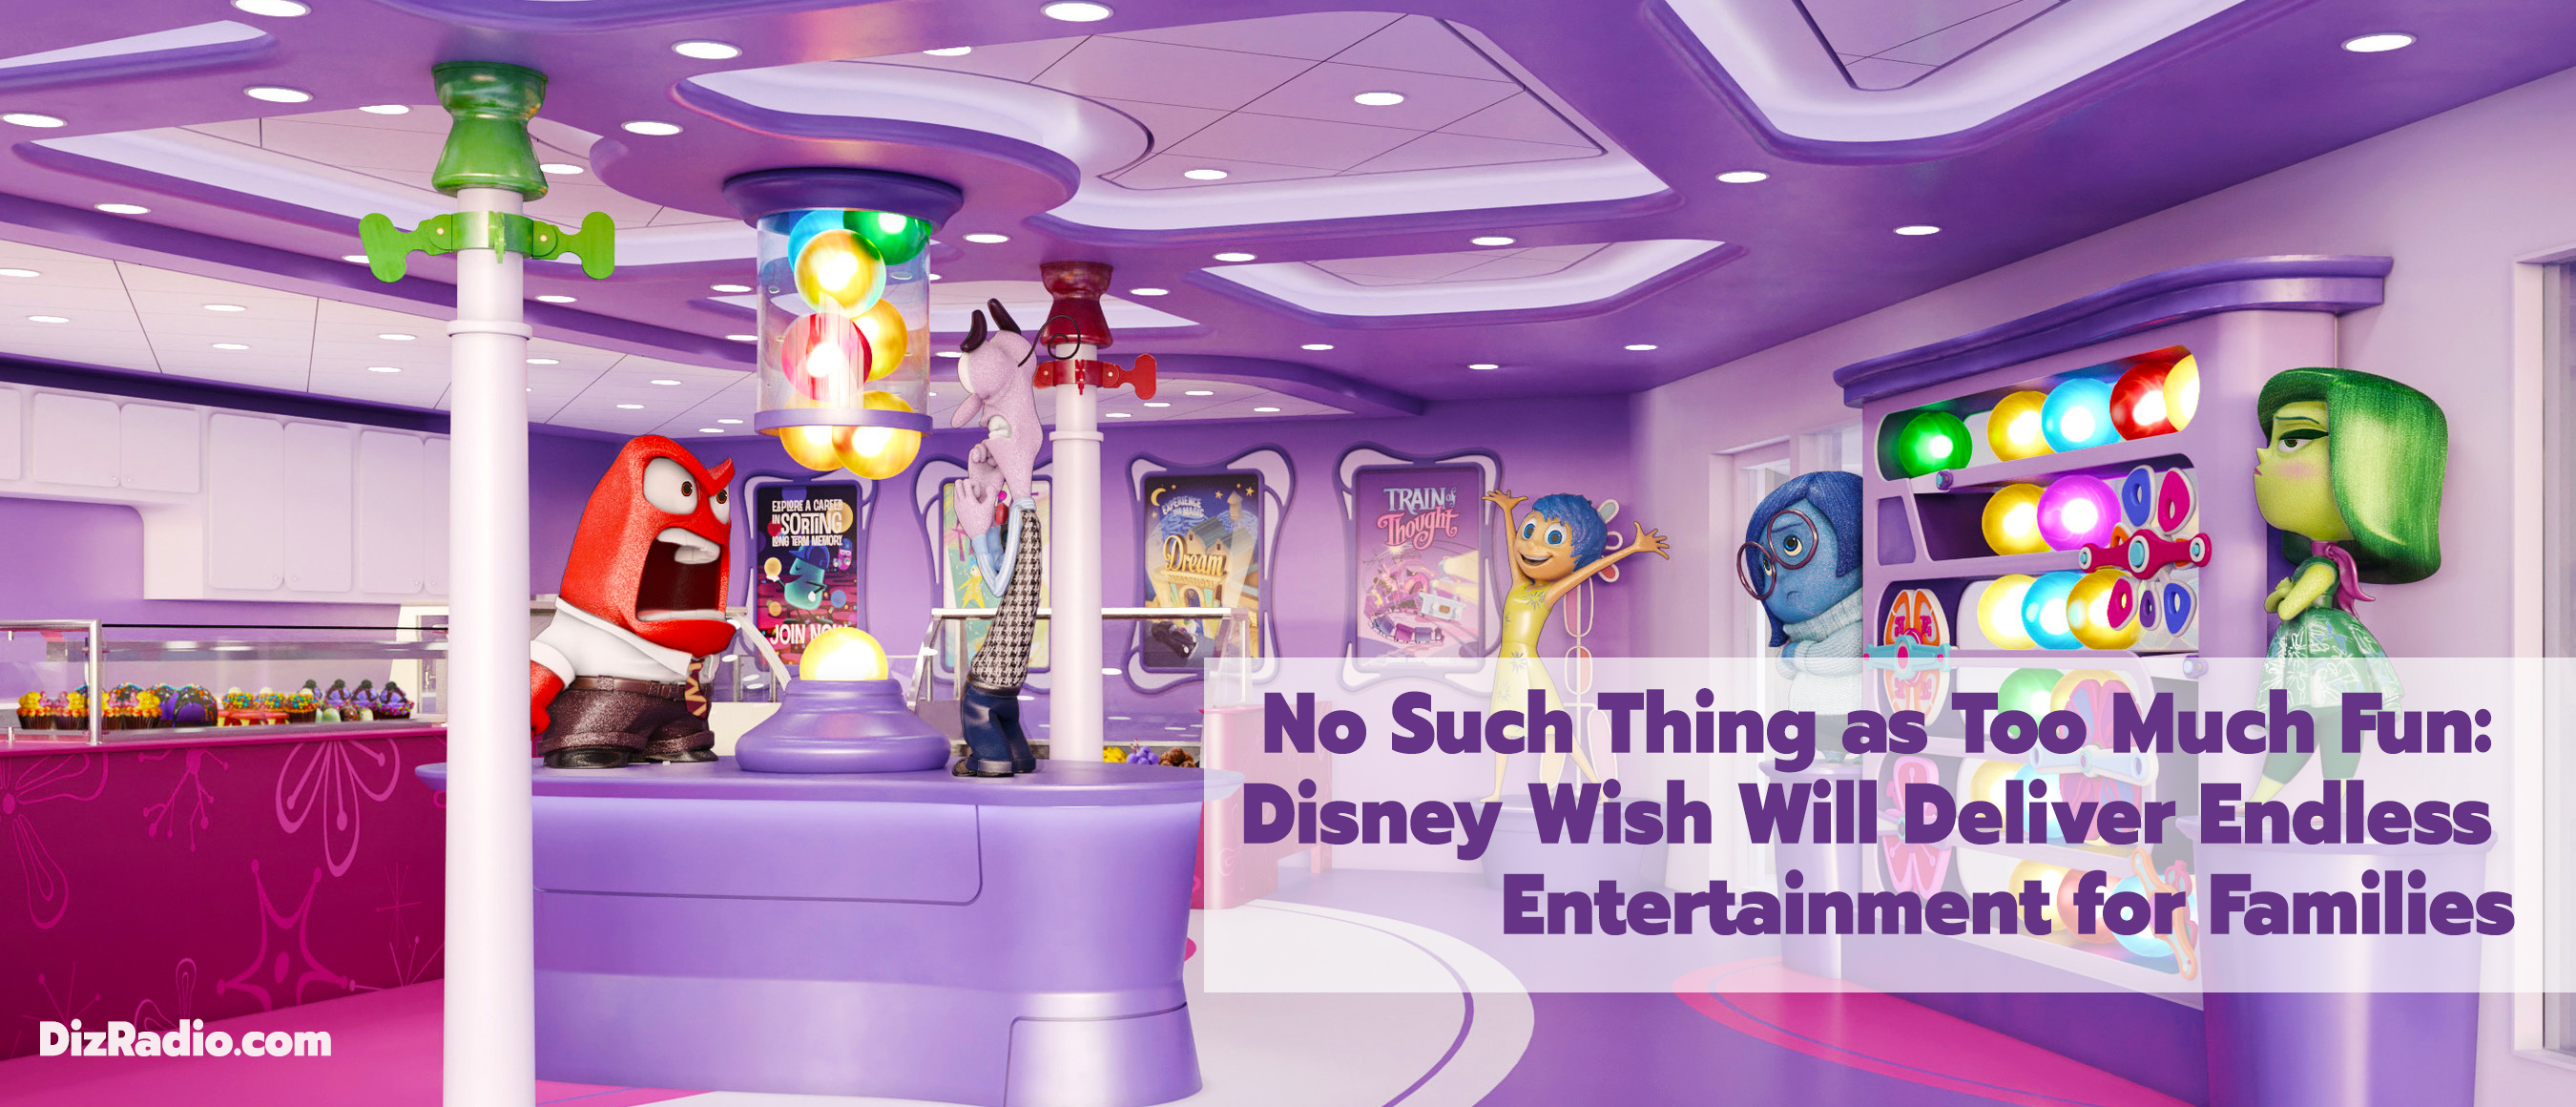 No Such Thing as Too Much Fun: Disney Wish Will Deliver Endless Entertainment for Families